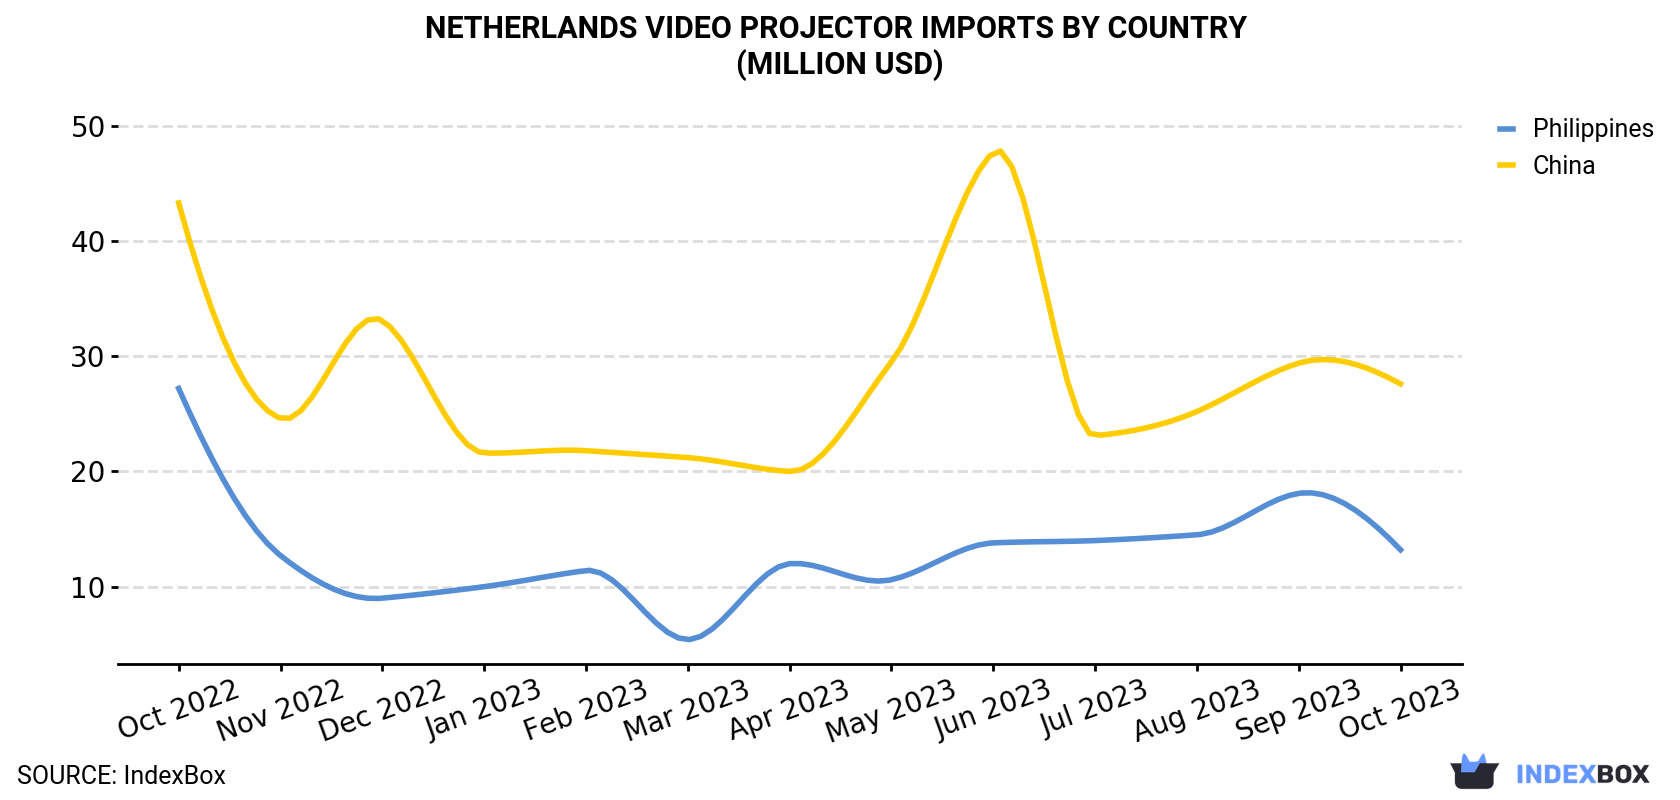 Netherlands Video Projector Imports By Country (Million USD)